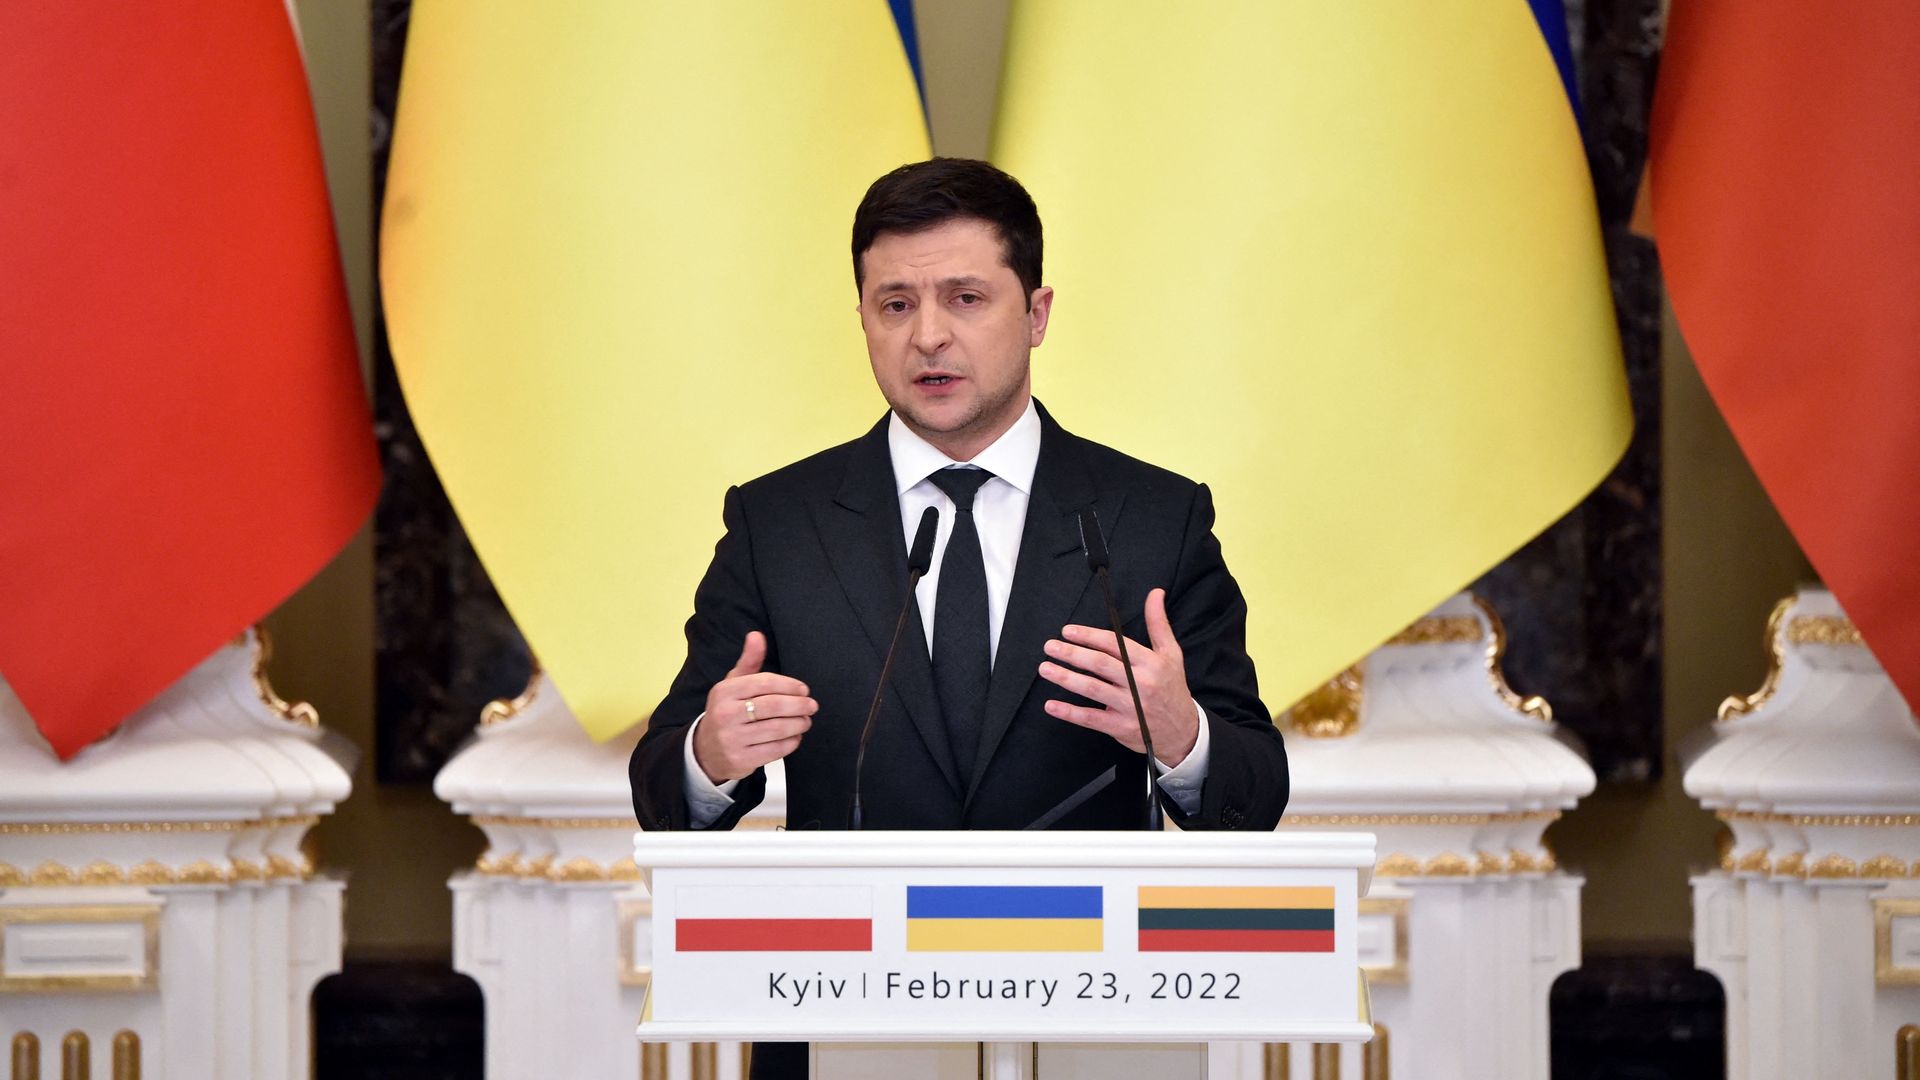 Photo of Volodymyr Zelensky speaking from a podium while gesturing with his hands in front of him